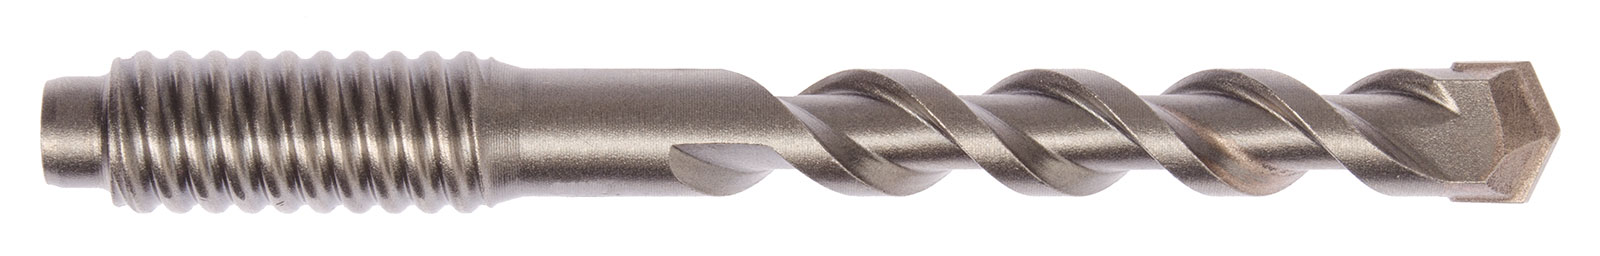 Centering drill bit with thread 81006